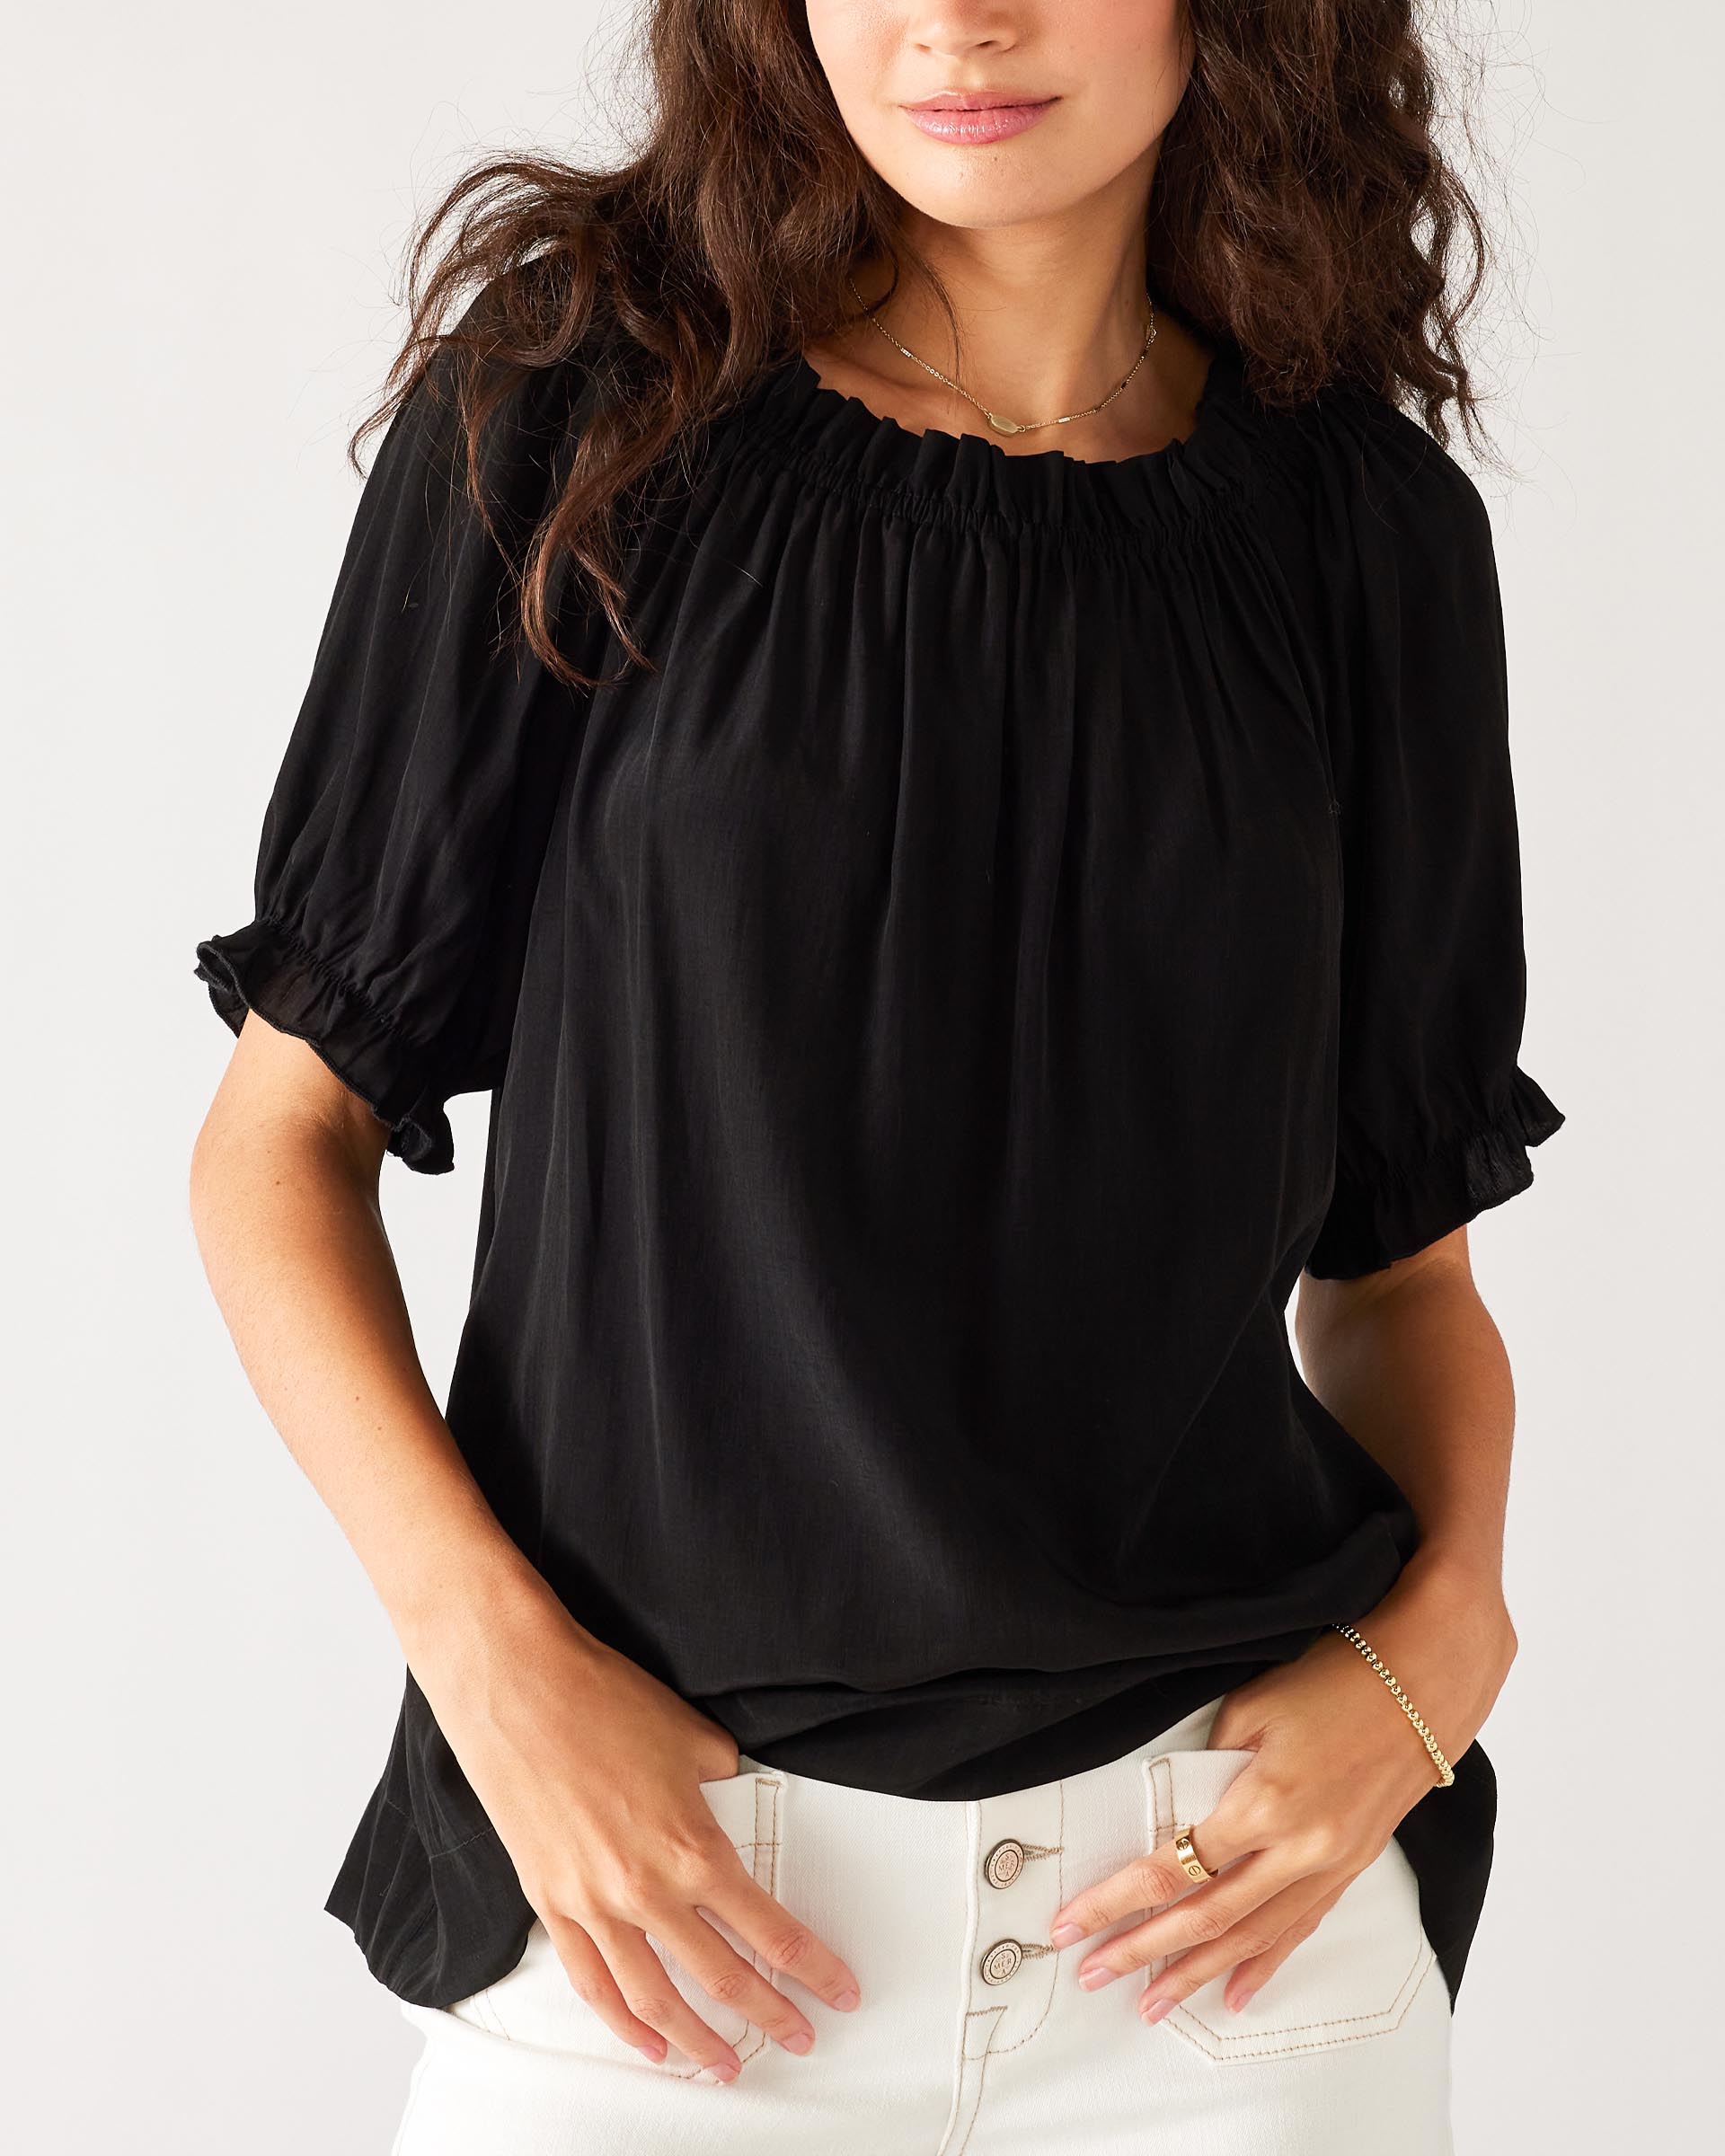 Women's Lightweight Relaxed Black Blouse Chest View